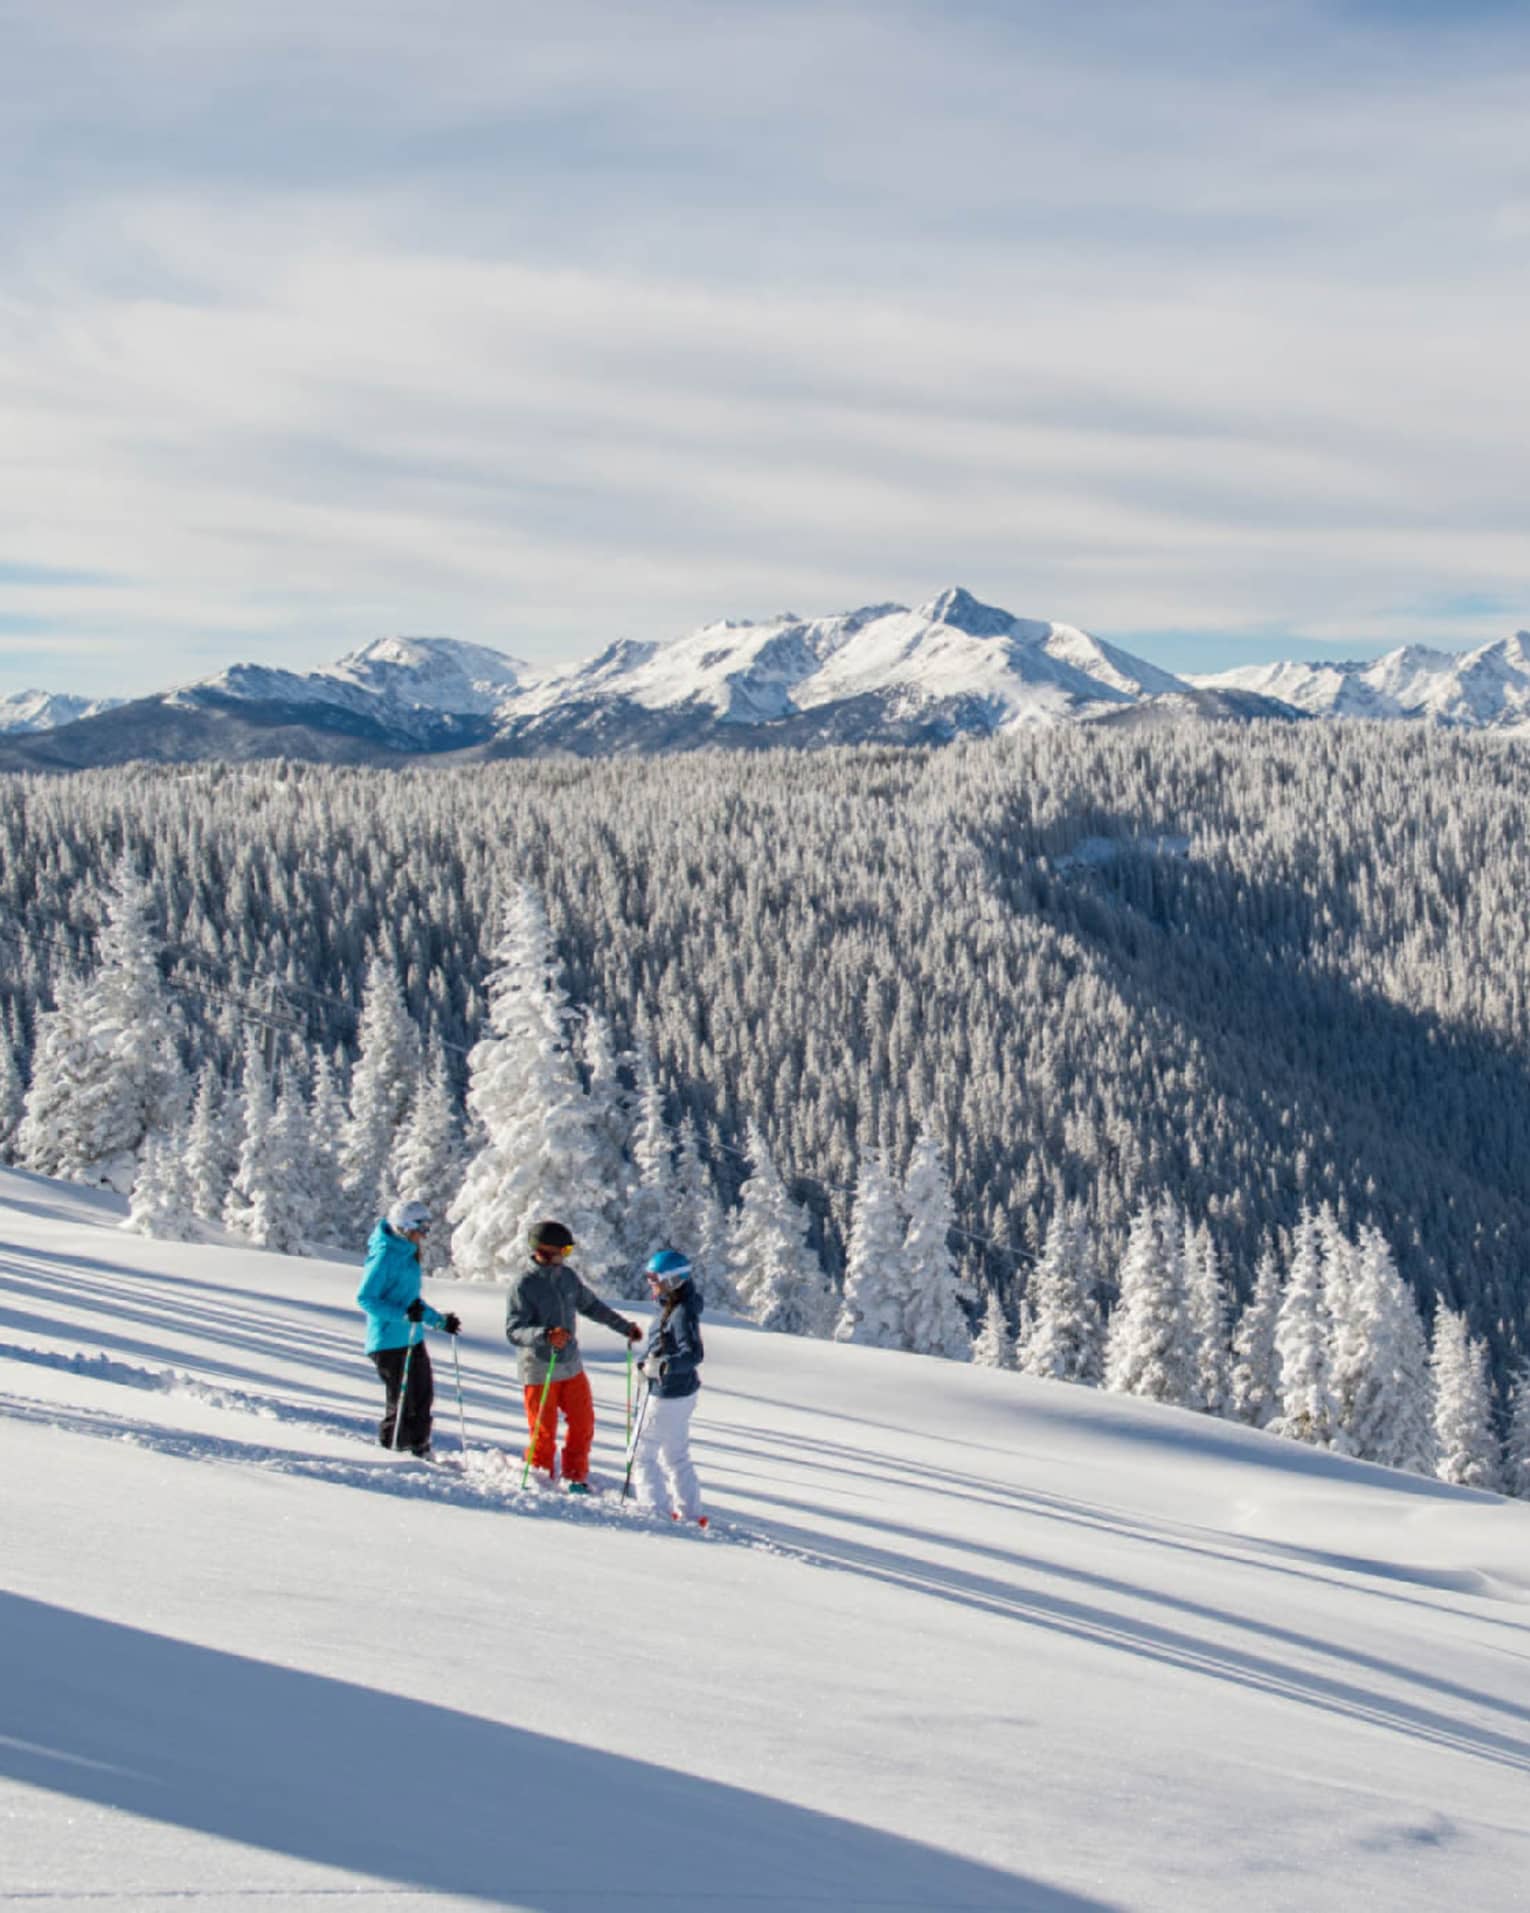 Three guests on skis pause on the ski hill, snow capped trees and mountains in distance 